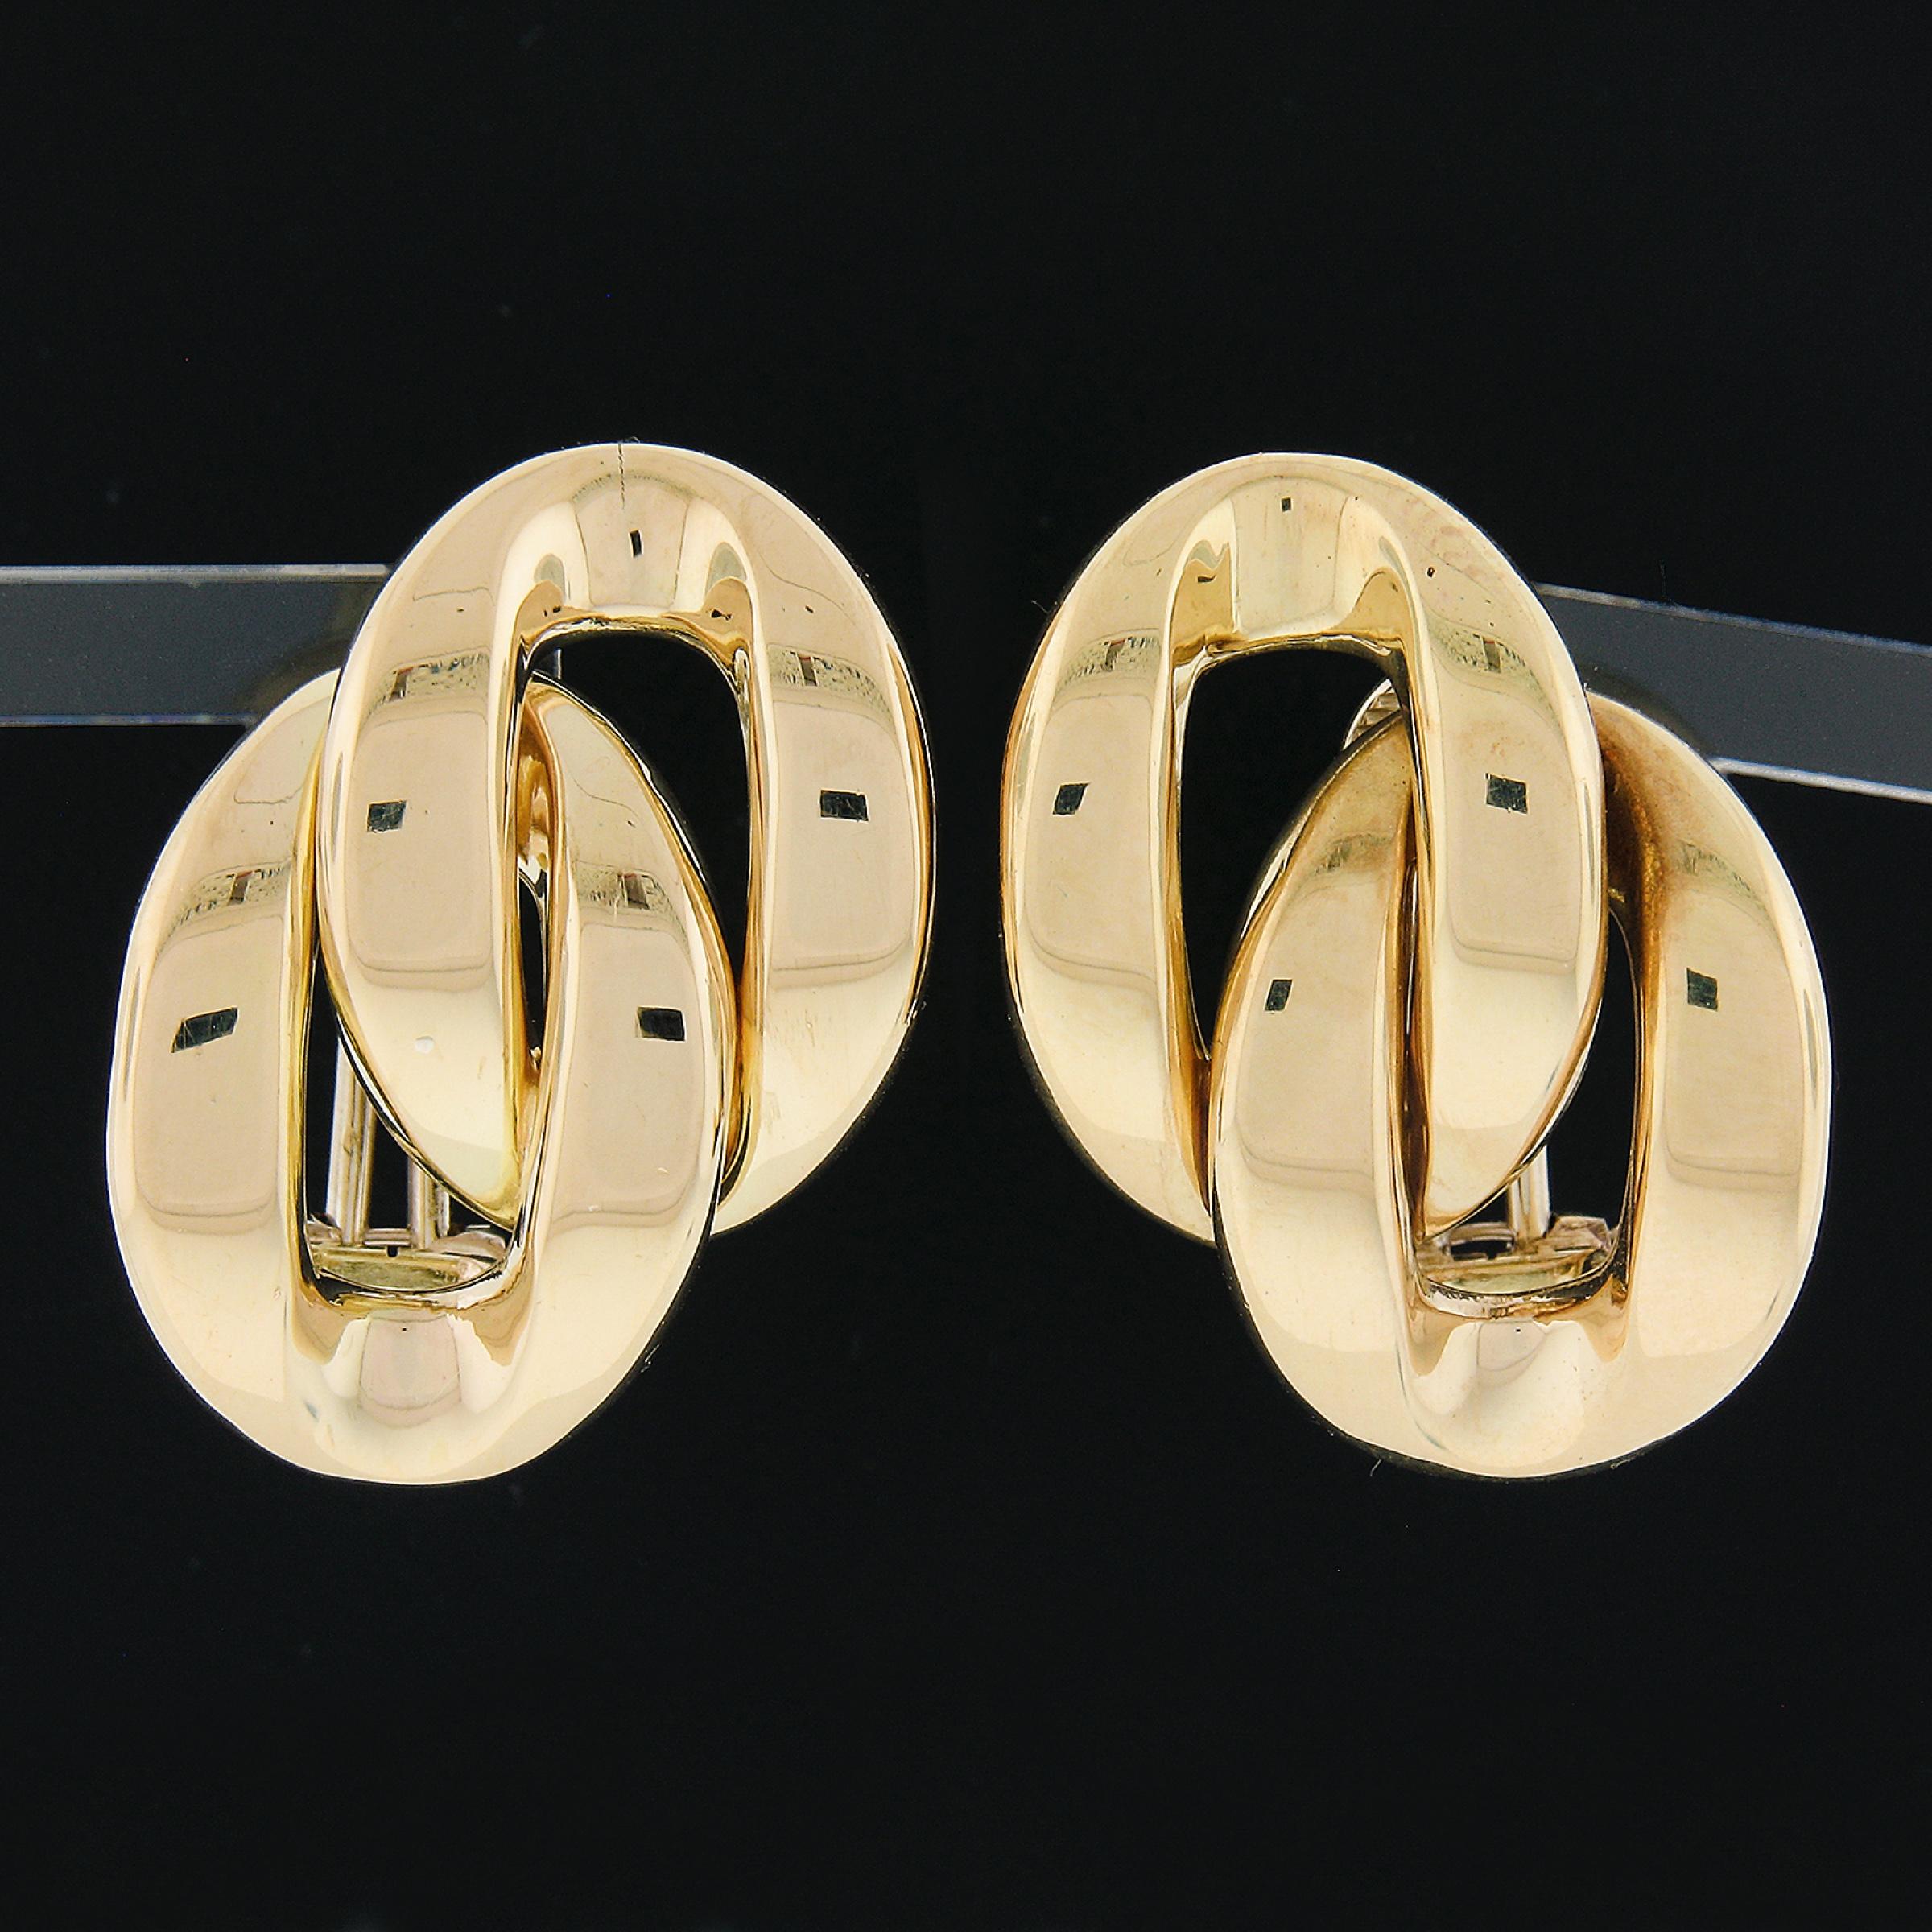 You are looking at a very beautiful pair of solid 18k yellow gold earrings. The earrings feature an interlocking curb design combining two polished slightly puffed oval shaped. These simple earrings are solidly constructed with tight and secure post